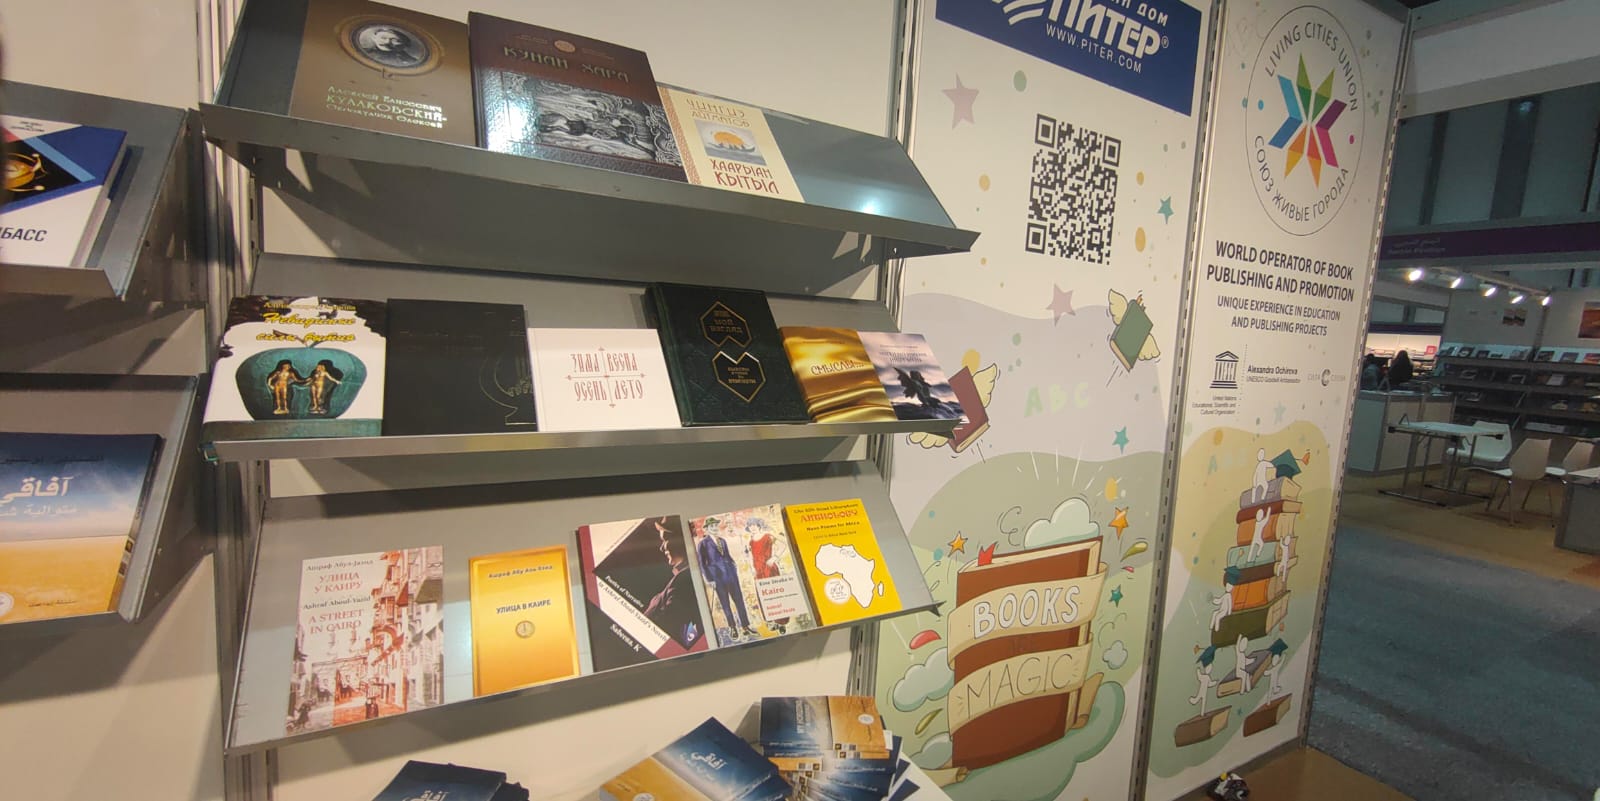 Ashraf Aboul-Yazid’s books exhibited at the Living Cities Union section